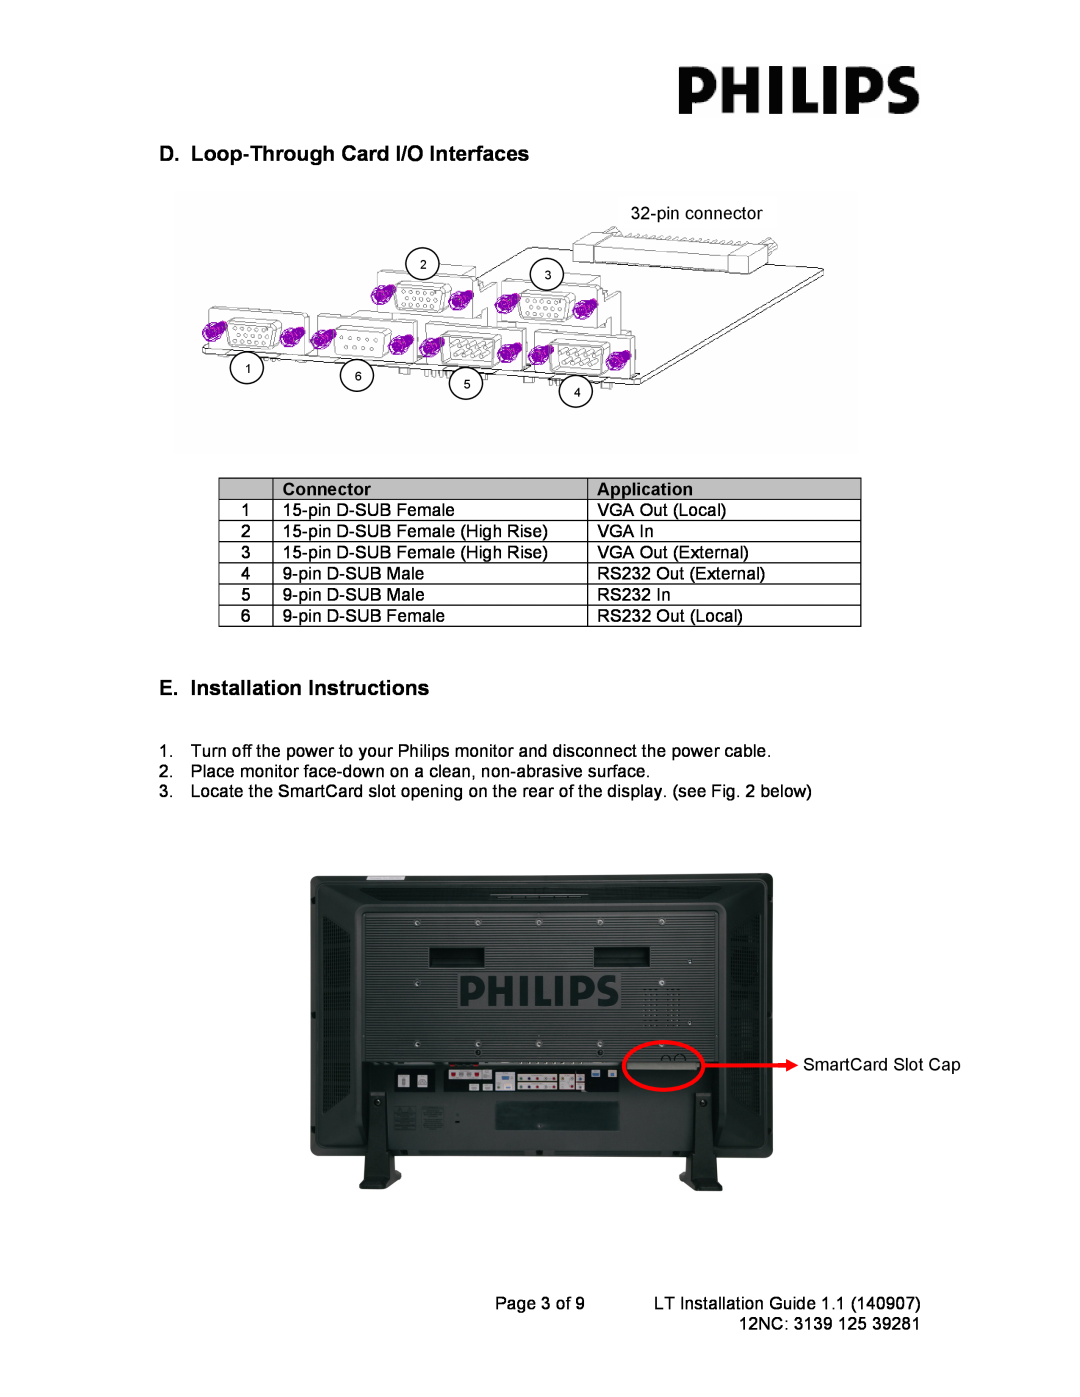 Philips CRA01/00 manual D. Loop-Through Card I/O Interfaces, E. Installation Instructions, Connector, Application 